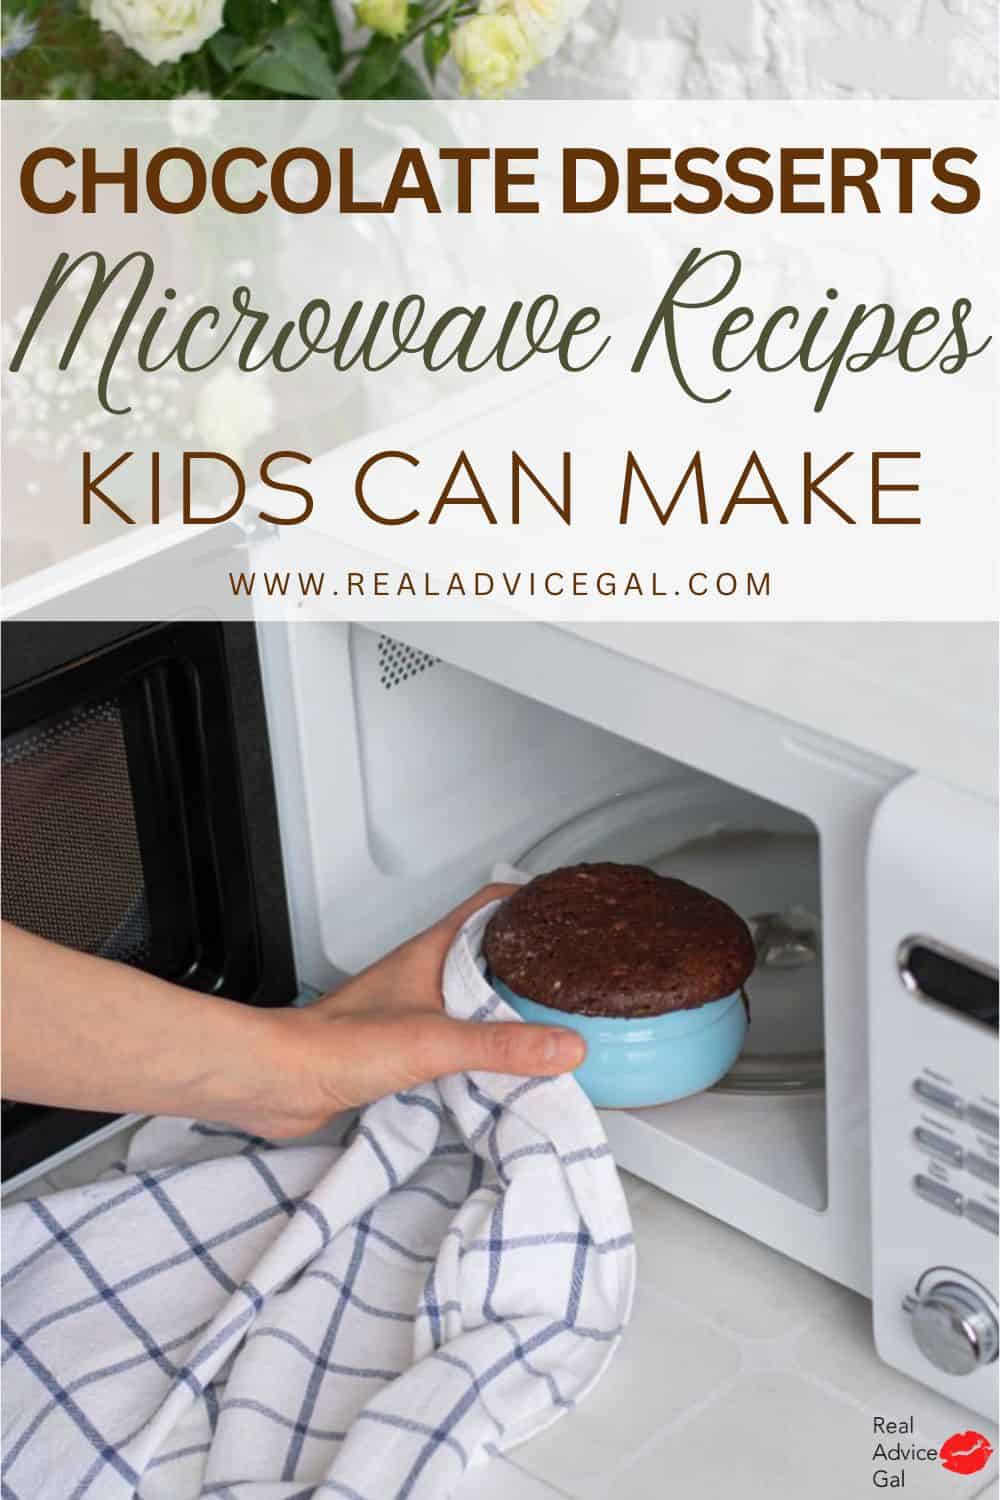 Chocolate desserts microwave recipes kids can make